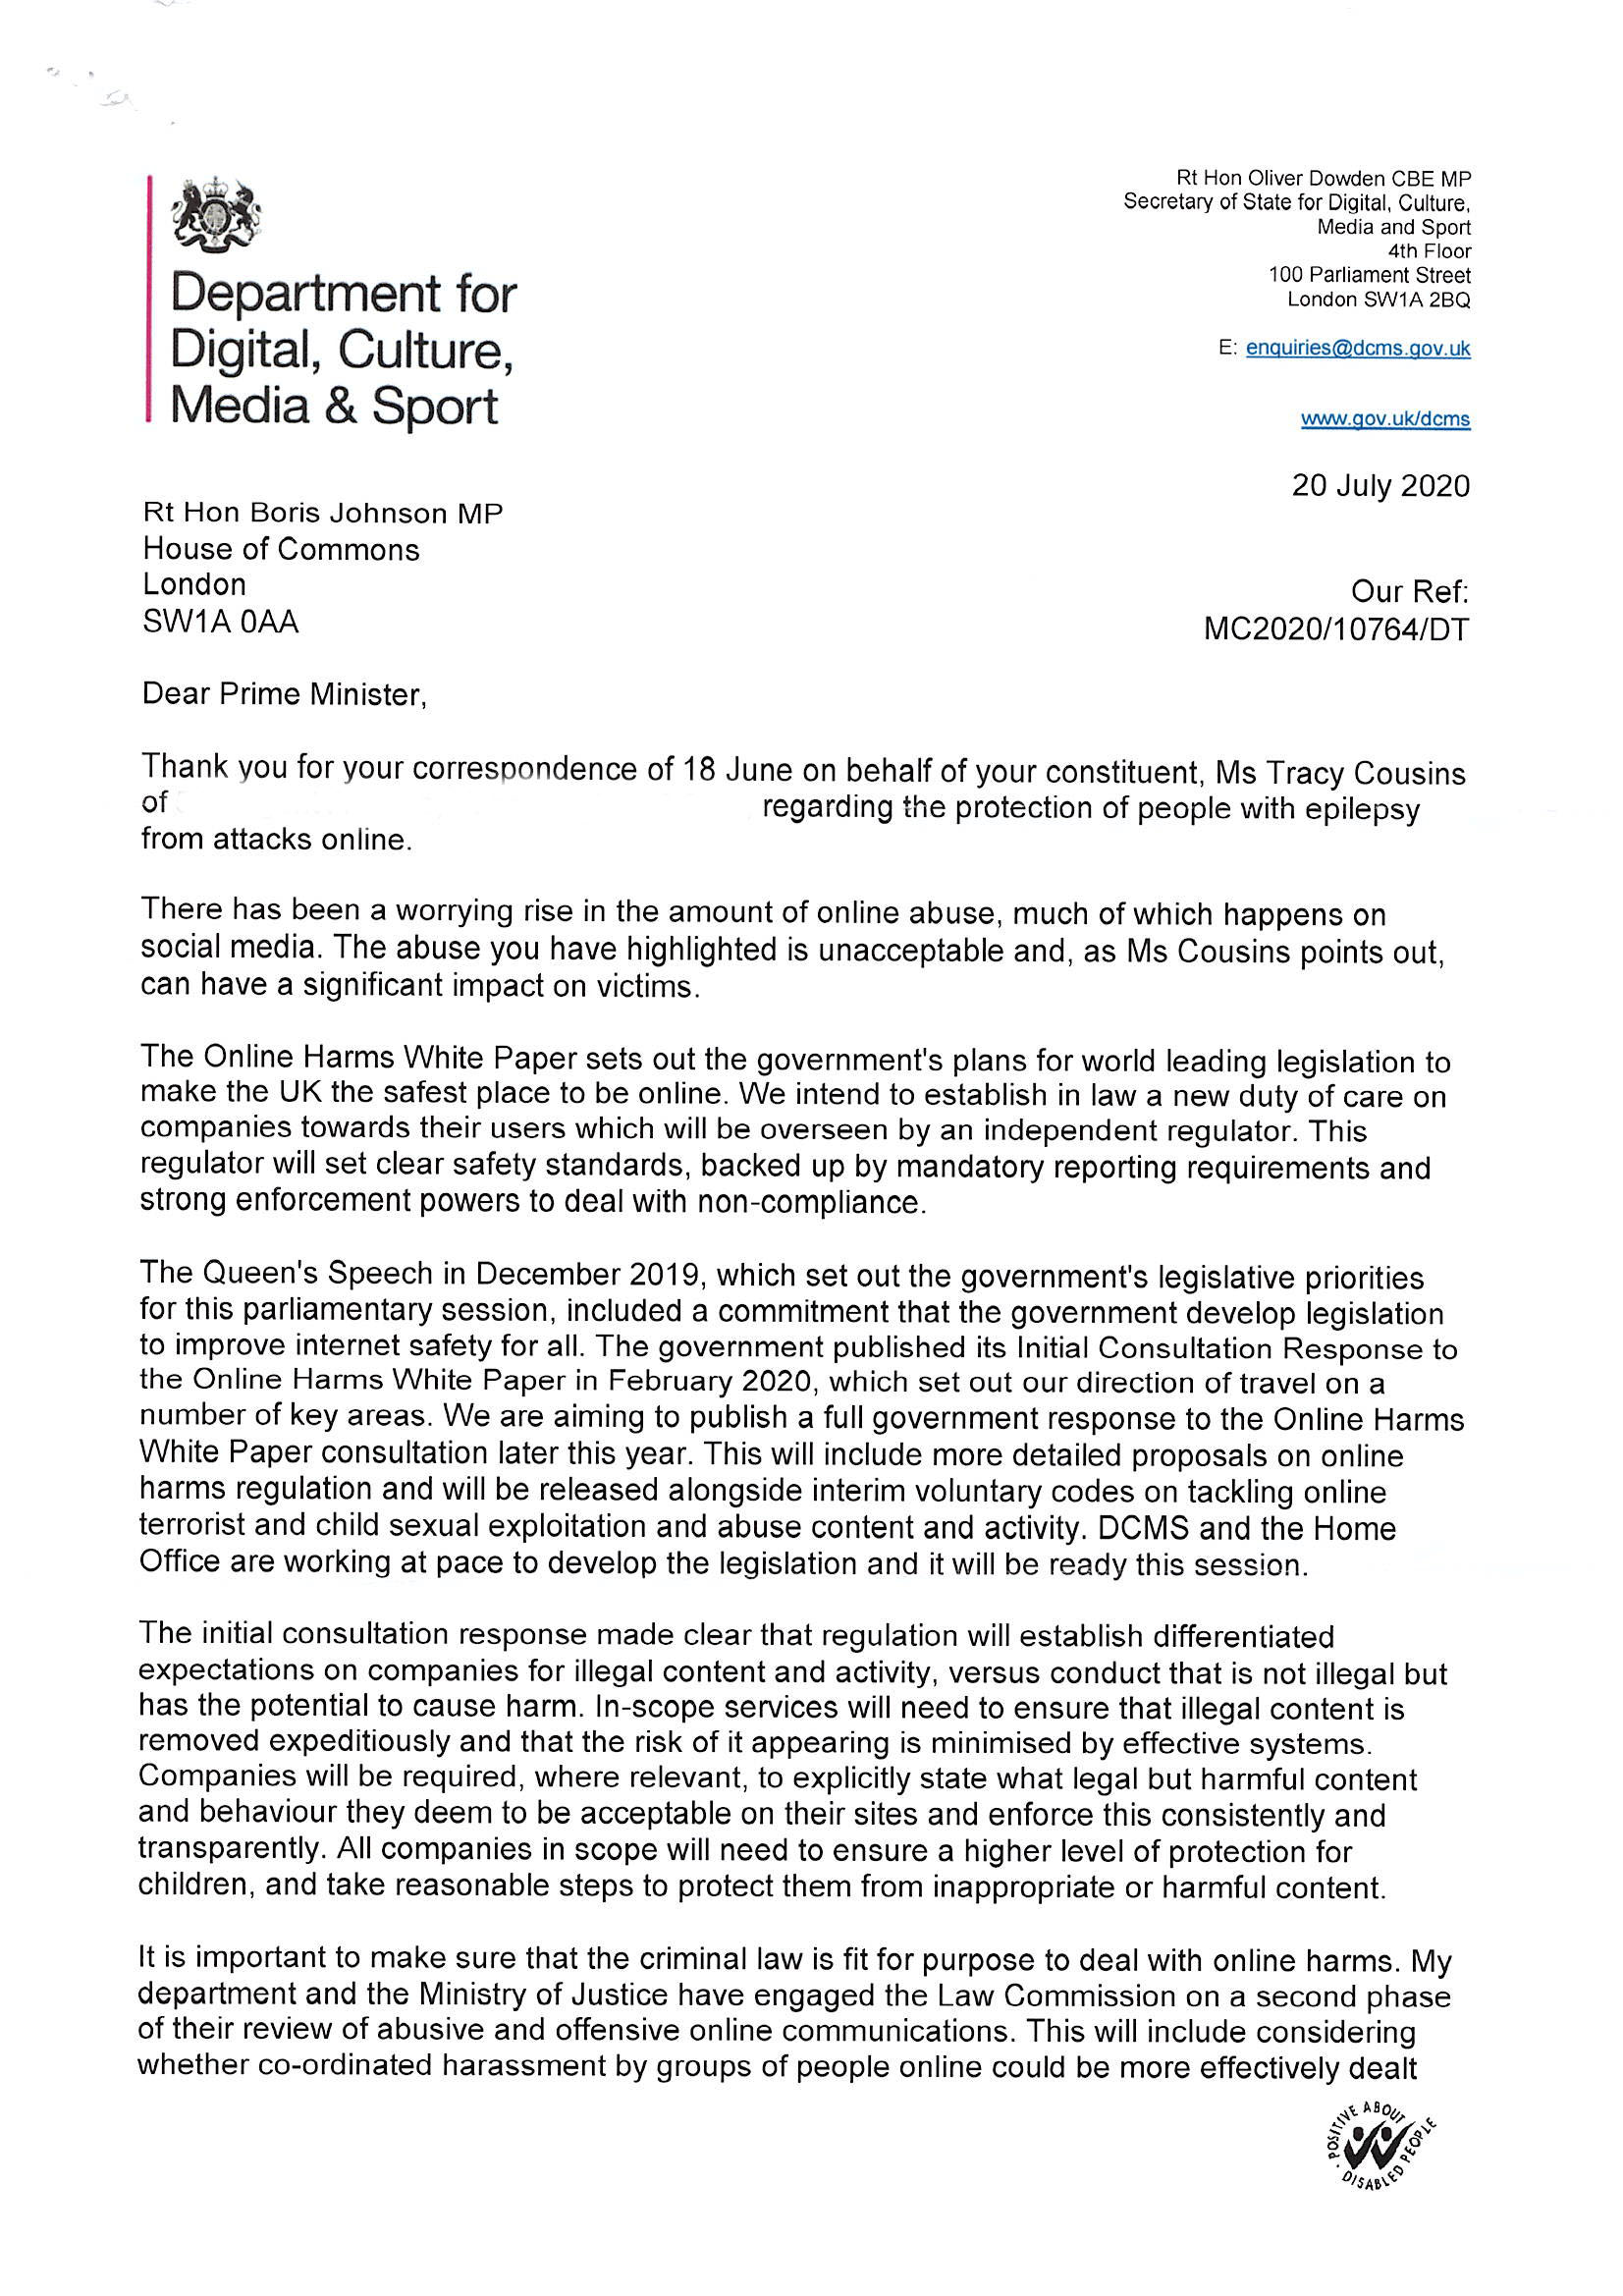 Letter from Boris Johnson and OD to Tracy Cousins